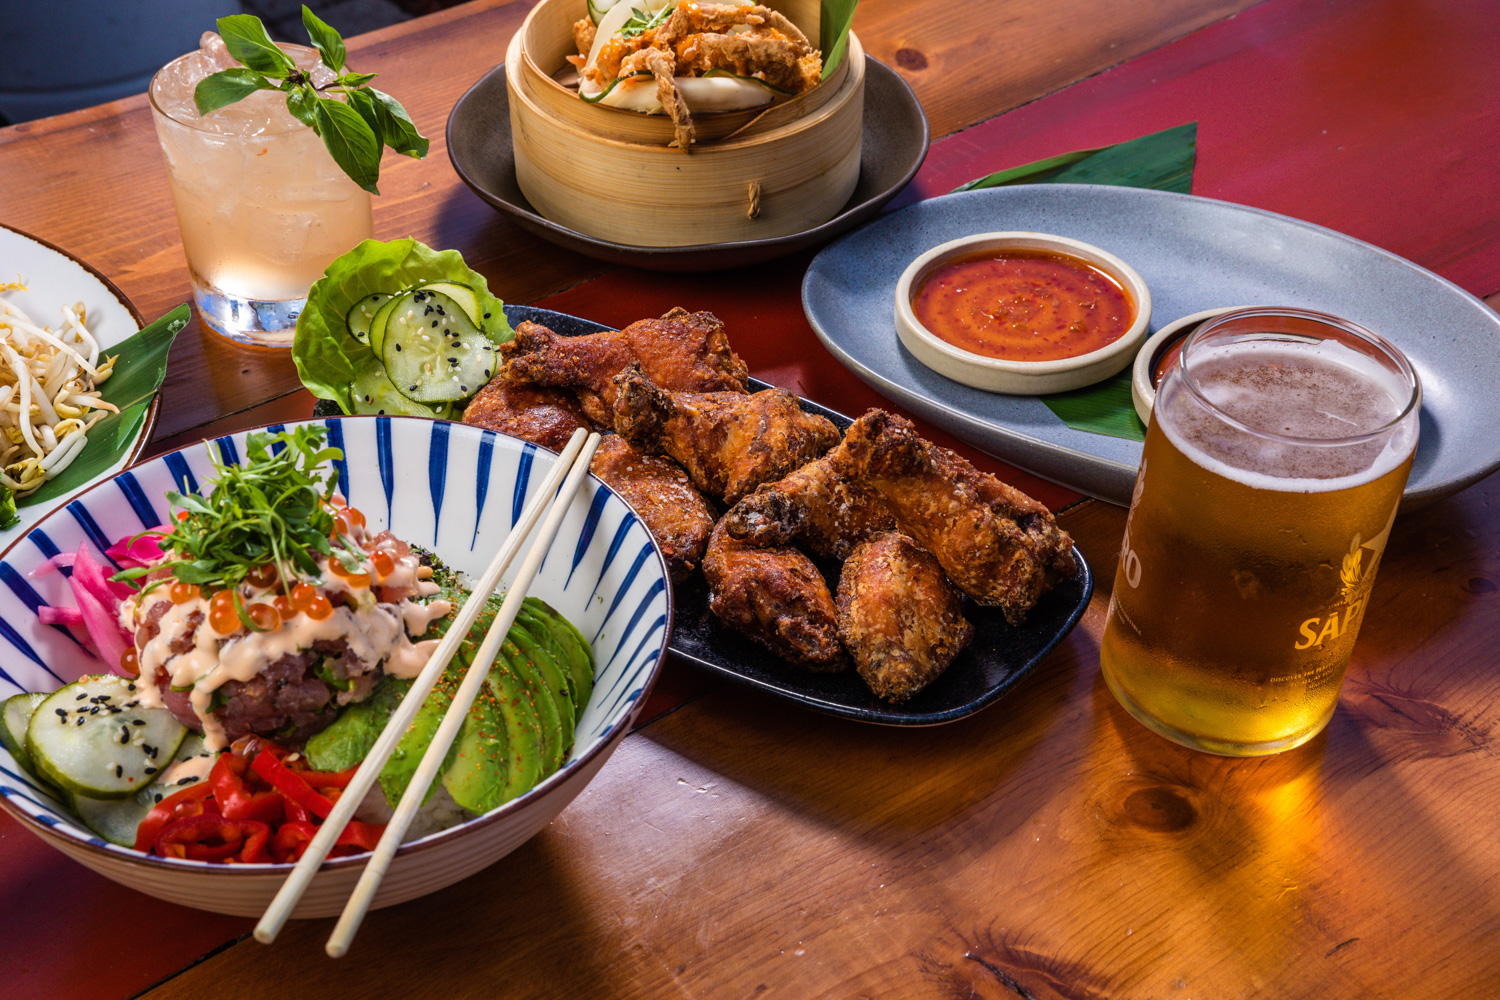 An arrangement of various dishes from Kapow! in Boca Raton, FL. Poke bowl, fried chicken, a pint of beer.